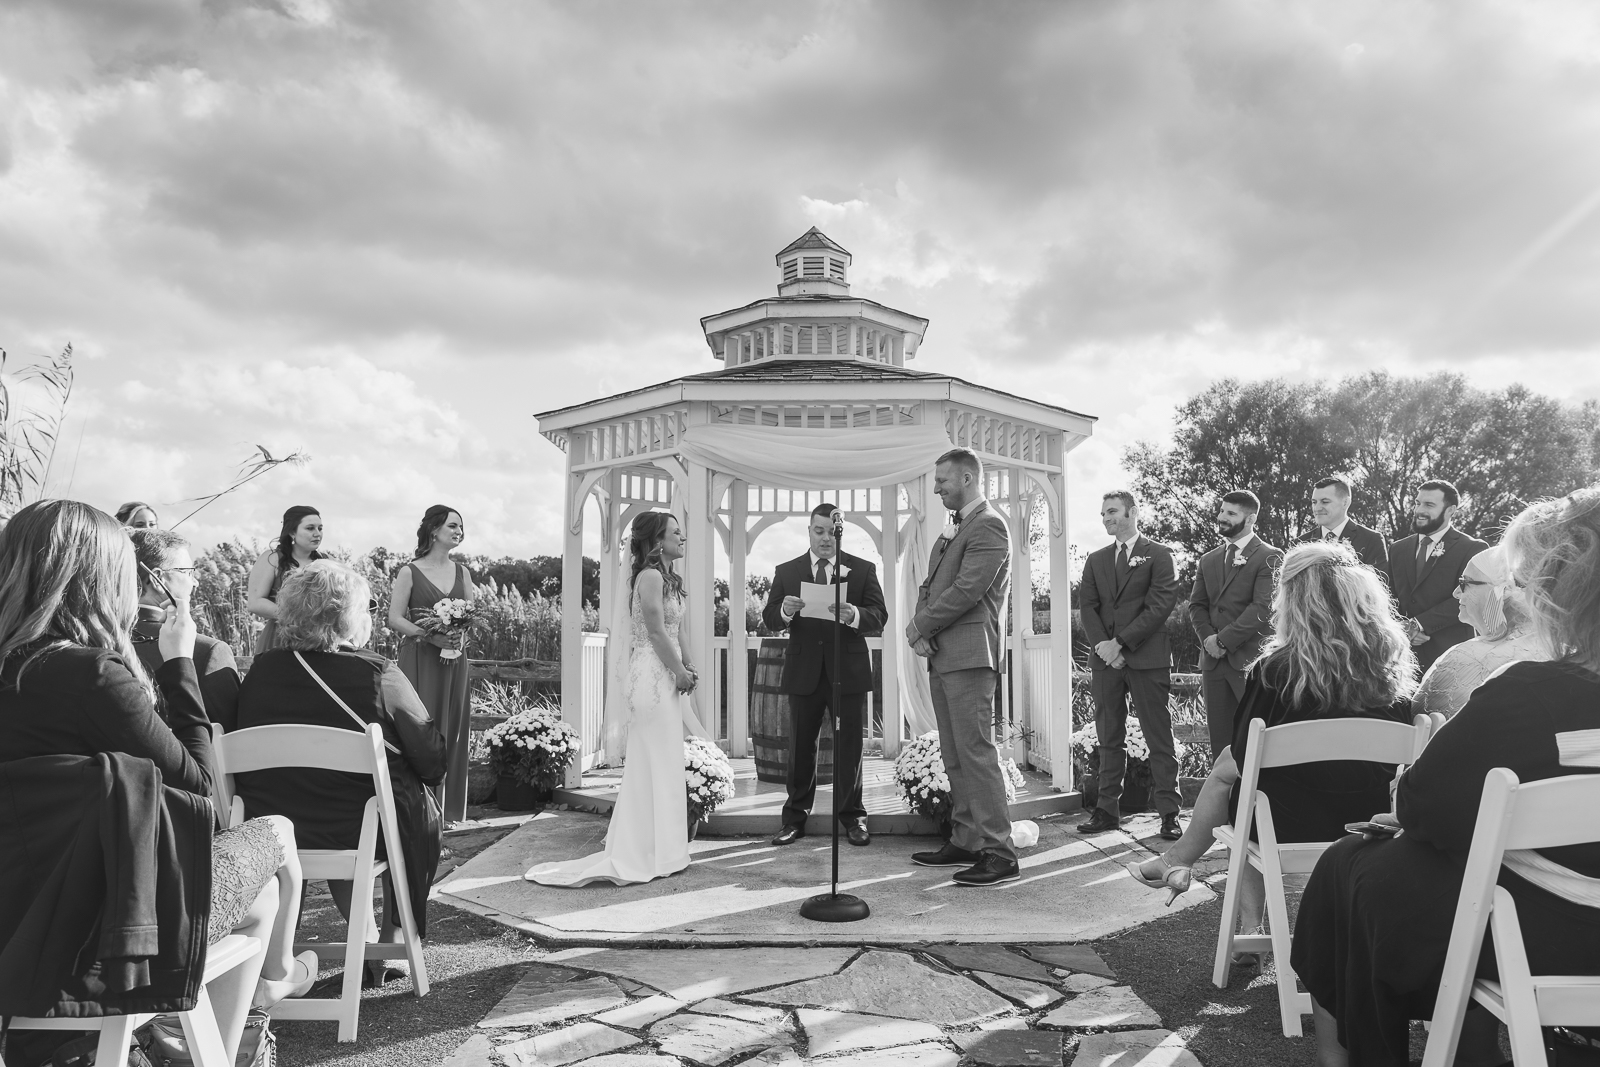 Bride and groom, bridal party, wedding ceremony, gazebo, nature, fall wedding, rustic outdoor wedding ceremony at White Birch Barn